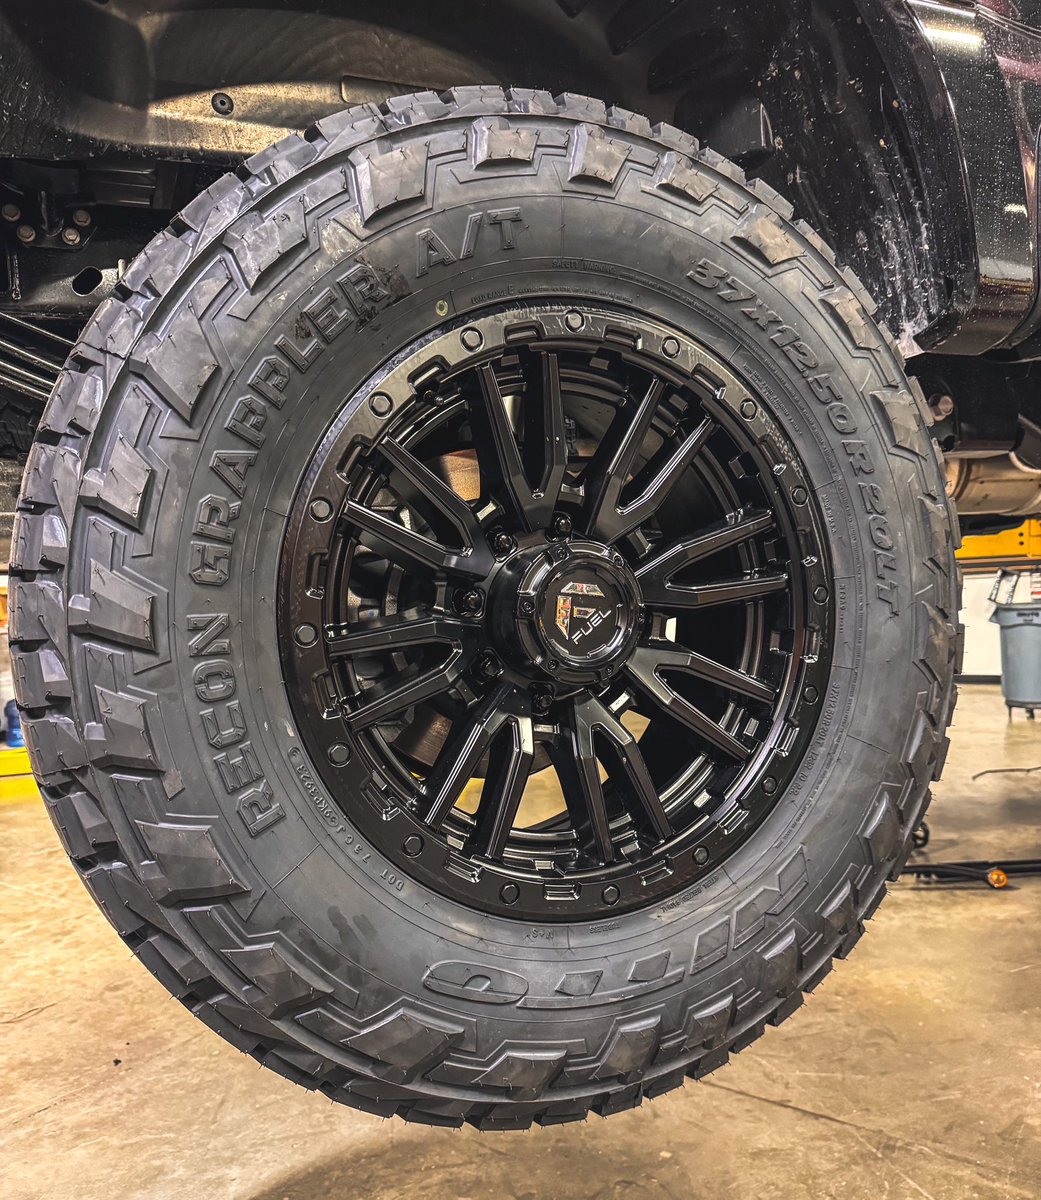 We have a set of @nittotire Recon Grapplers and a set of @fueloffroad Rebel 8’s in black going on the F250 build we have in the shop. Stay tuned for the finished product!

#RebelOffRoad #Texas #USA #Ford #Diesel